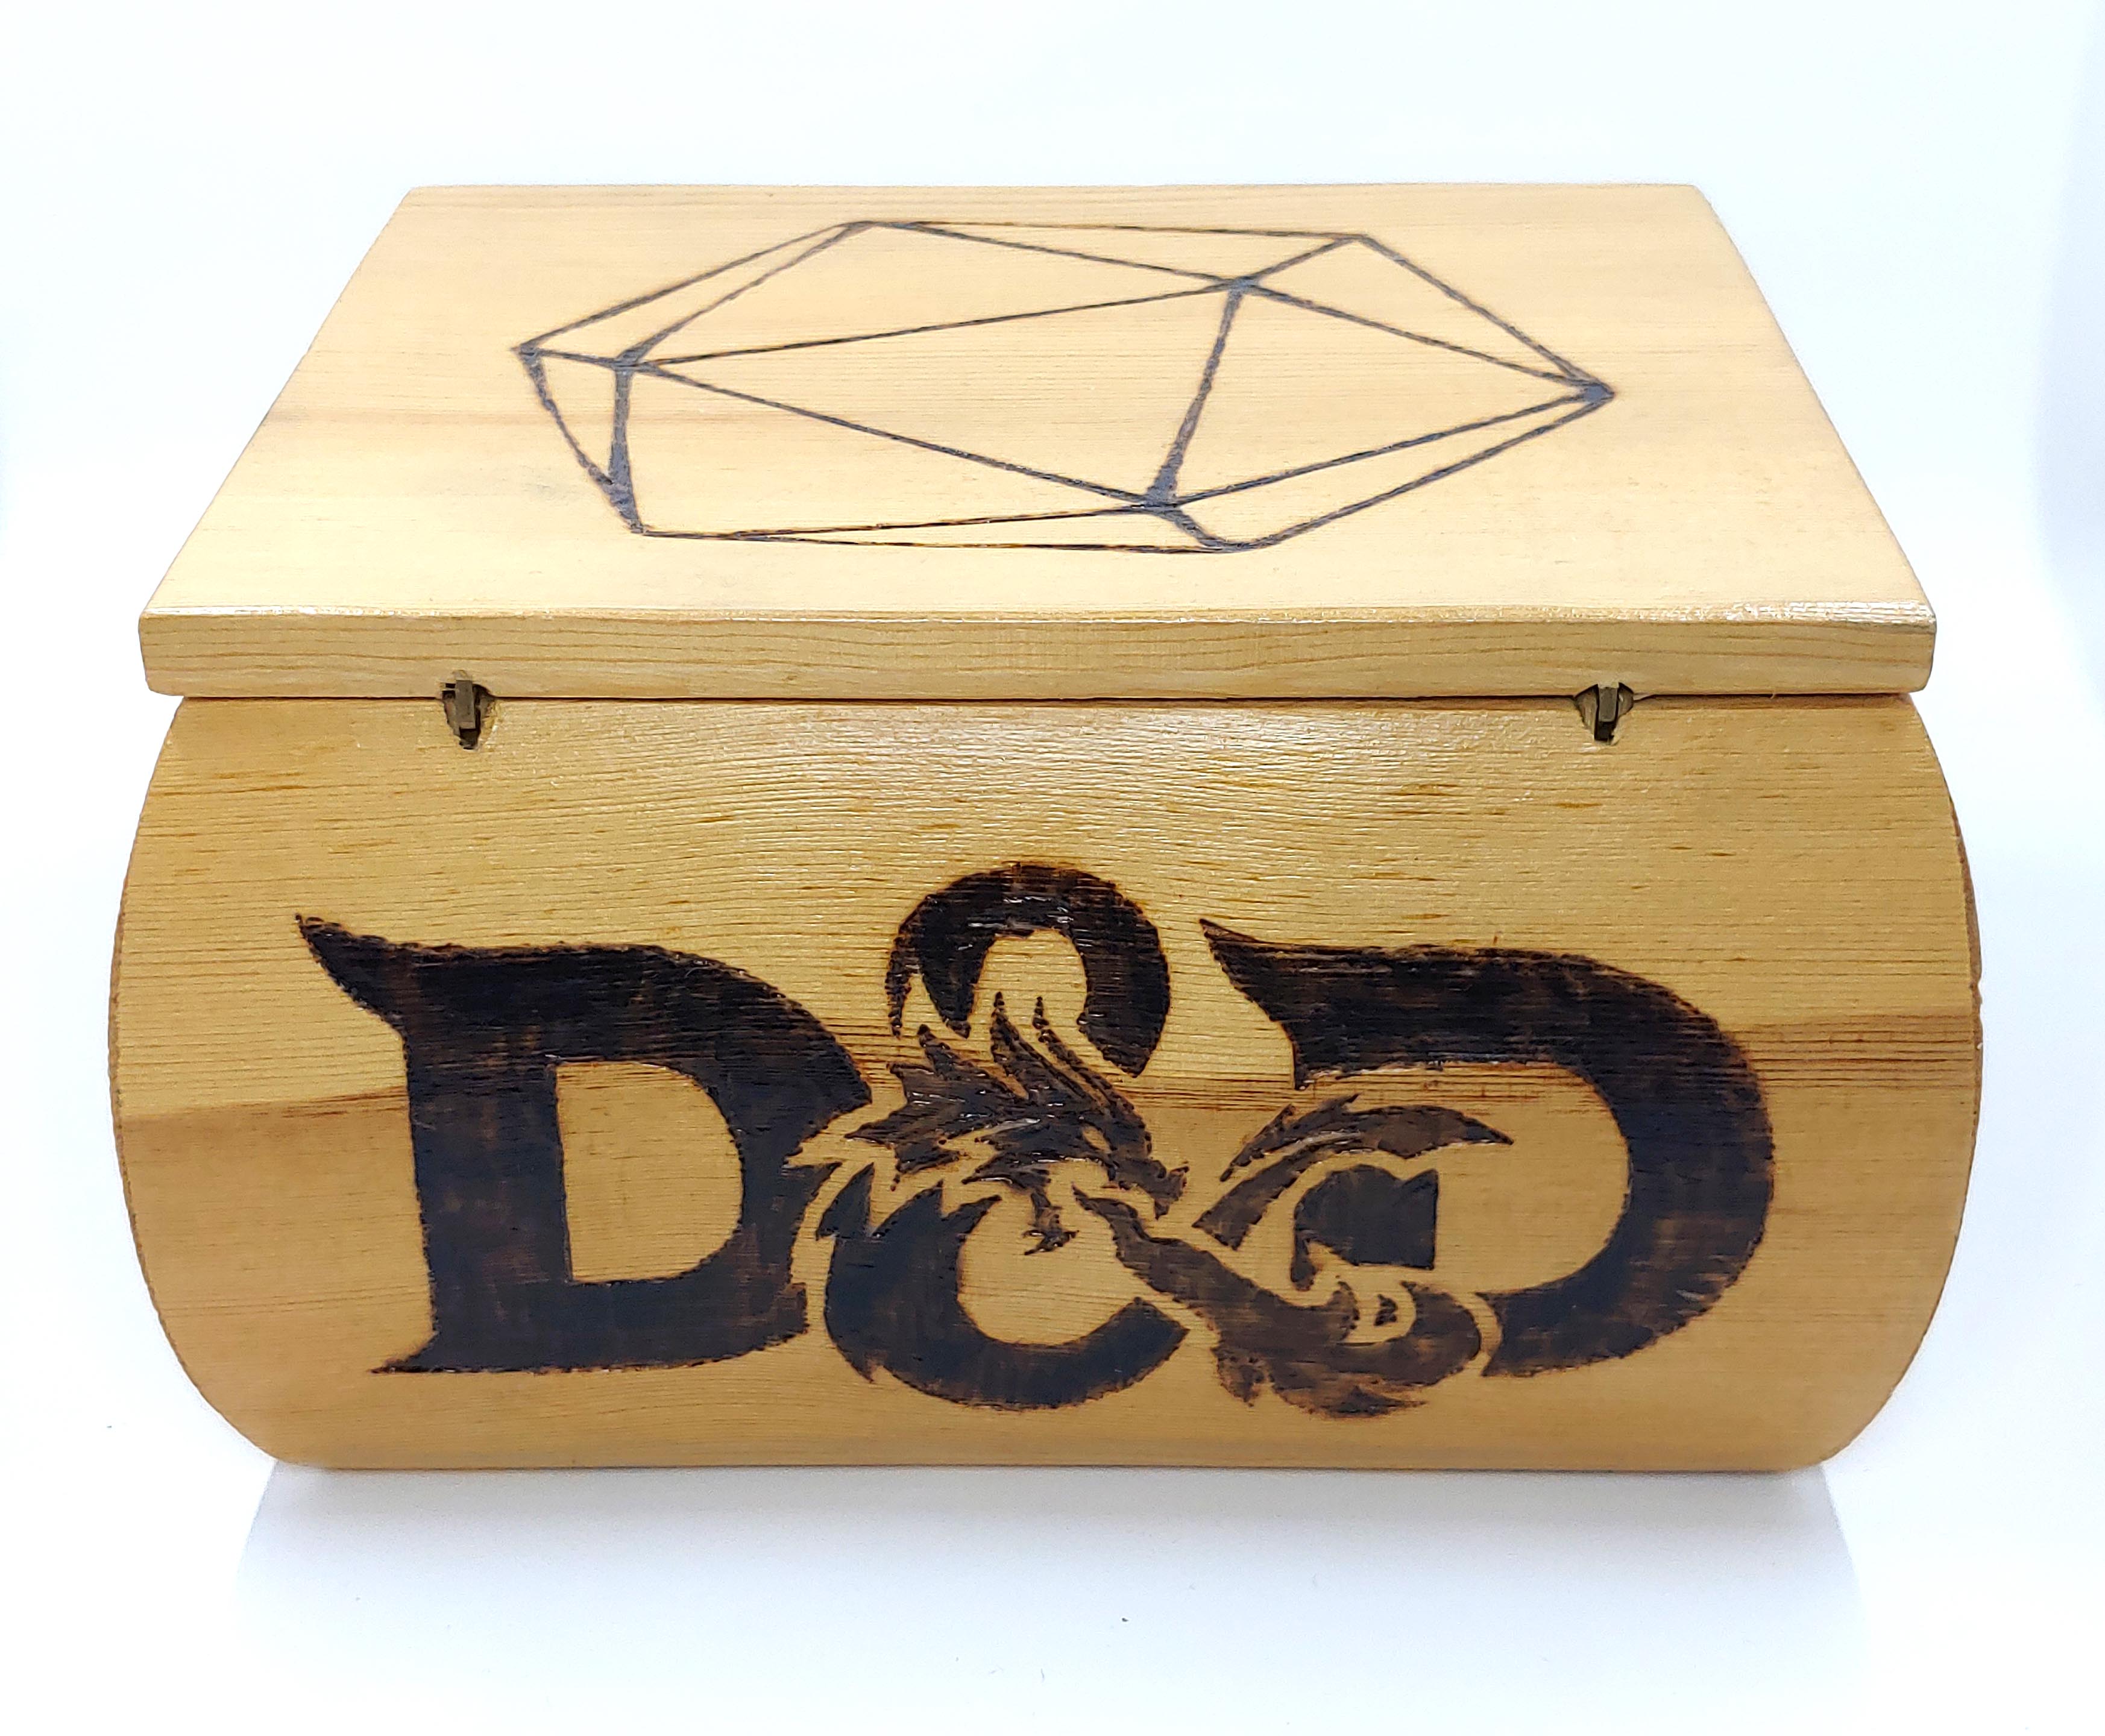 Discover D&D as well as making opportunities in the Idea Studio